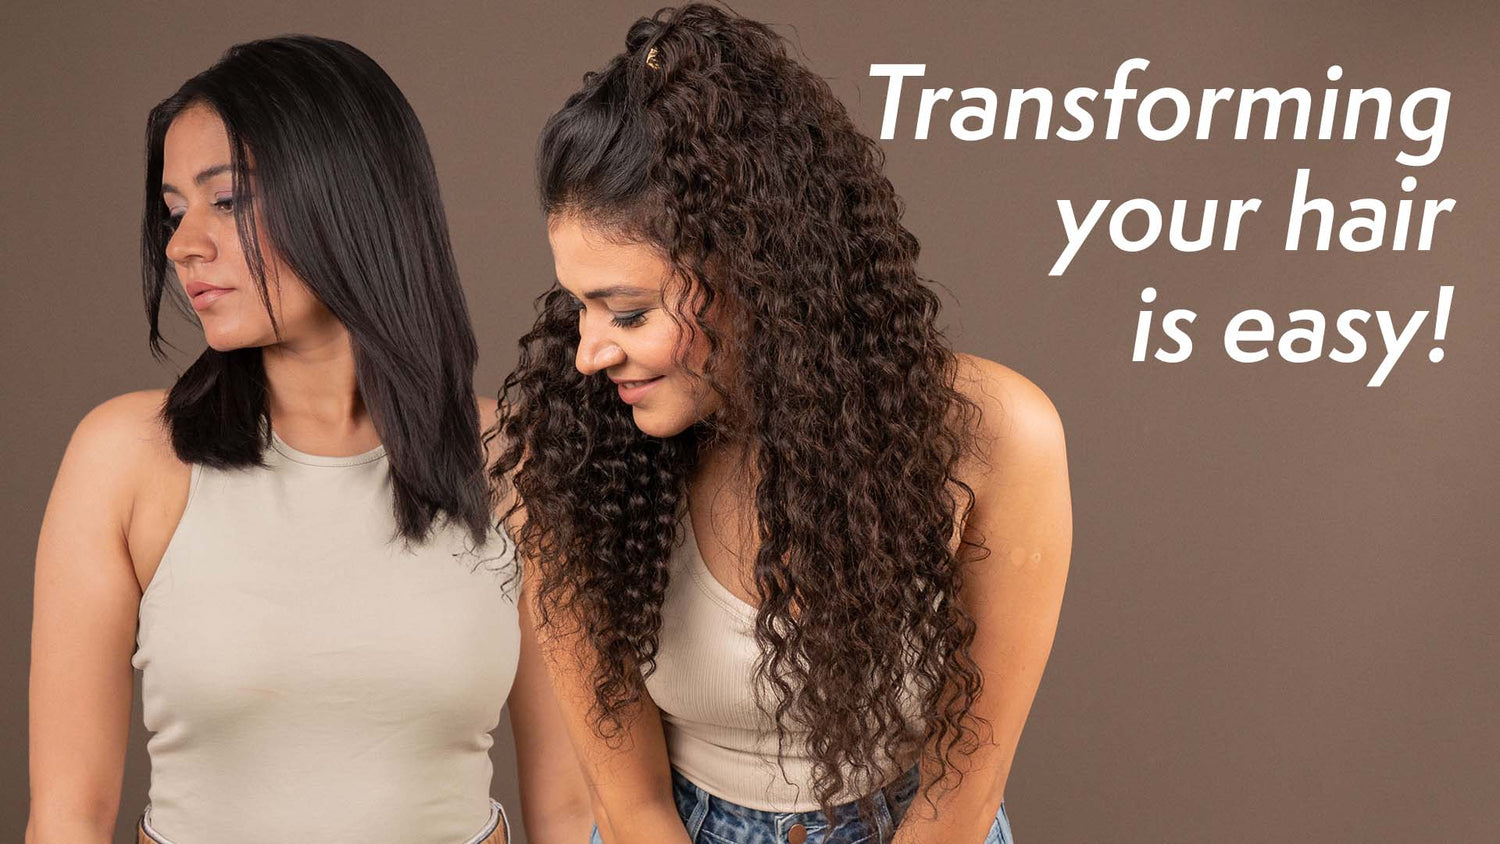 Transforming your hair is easy!